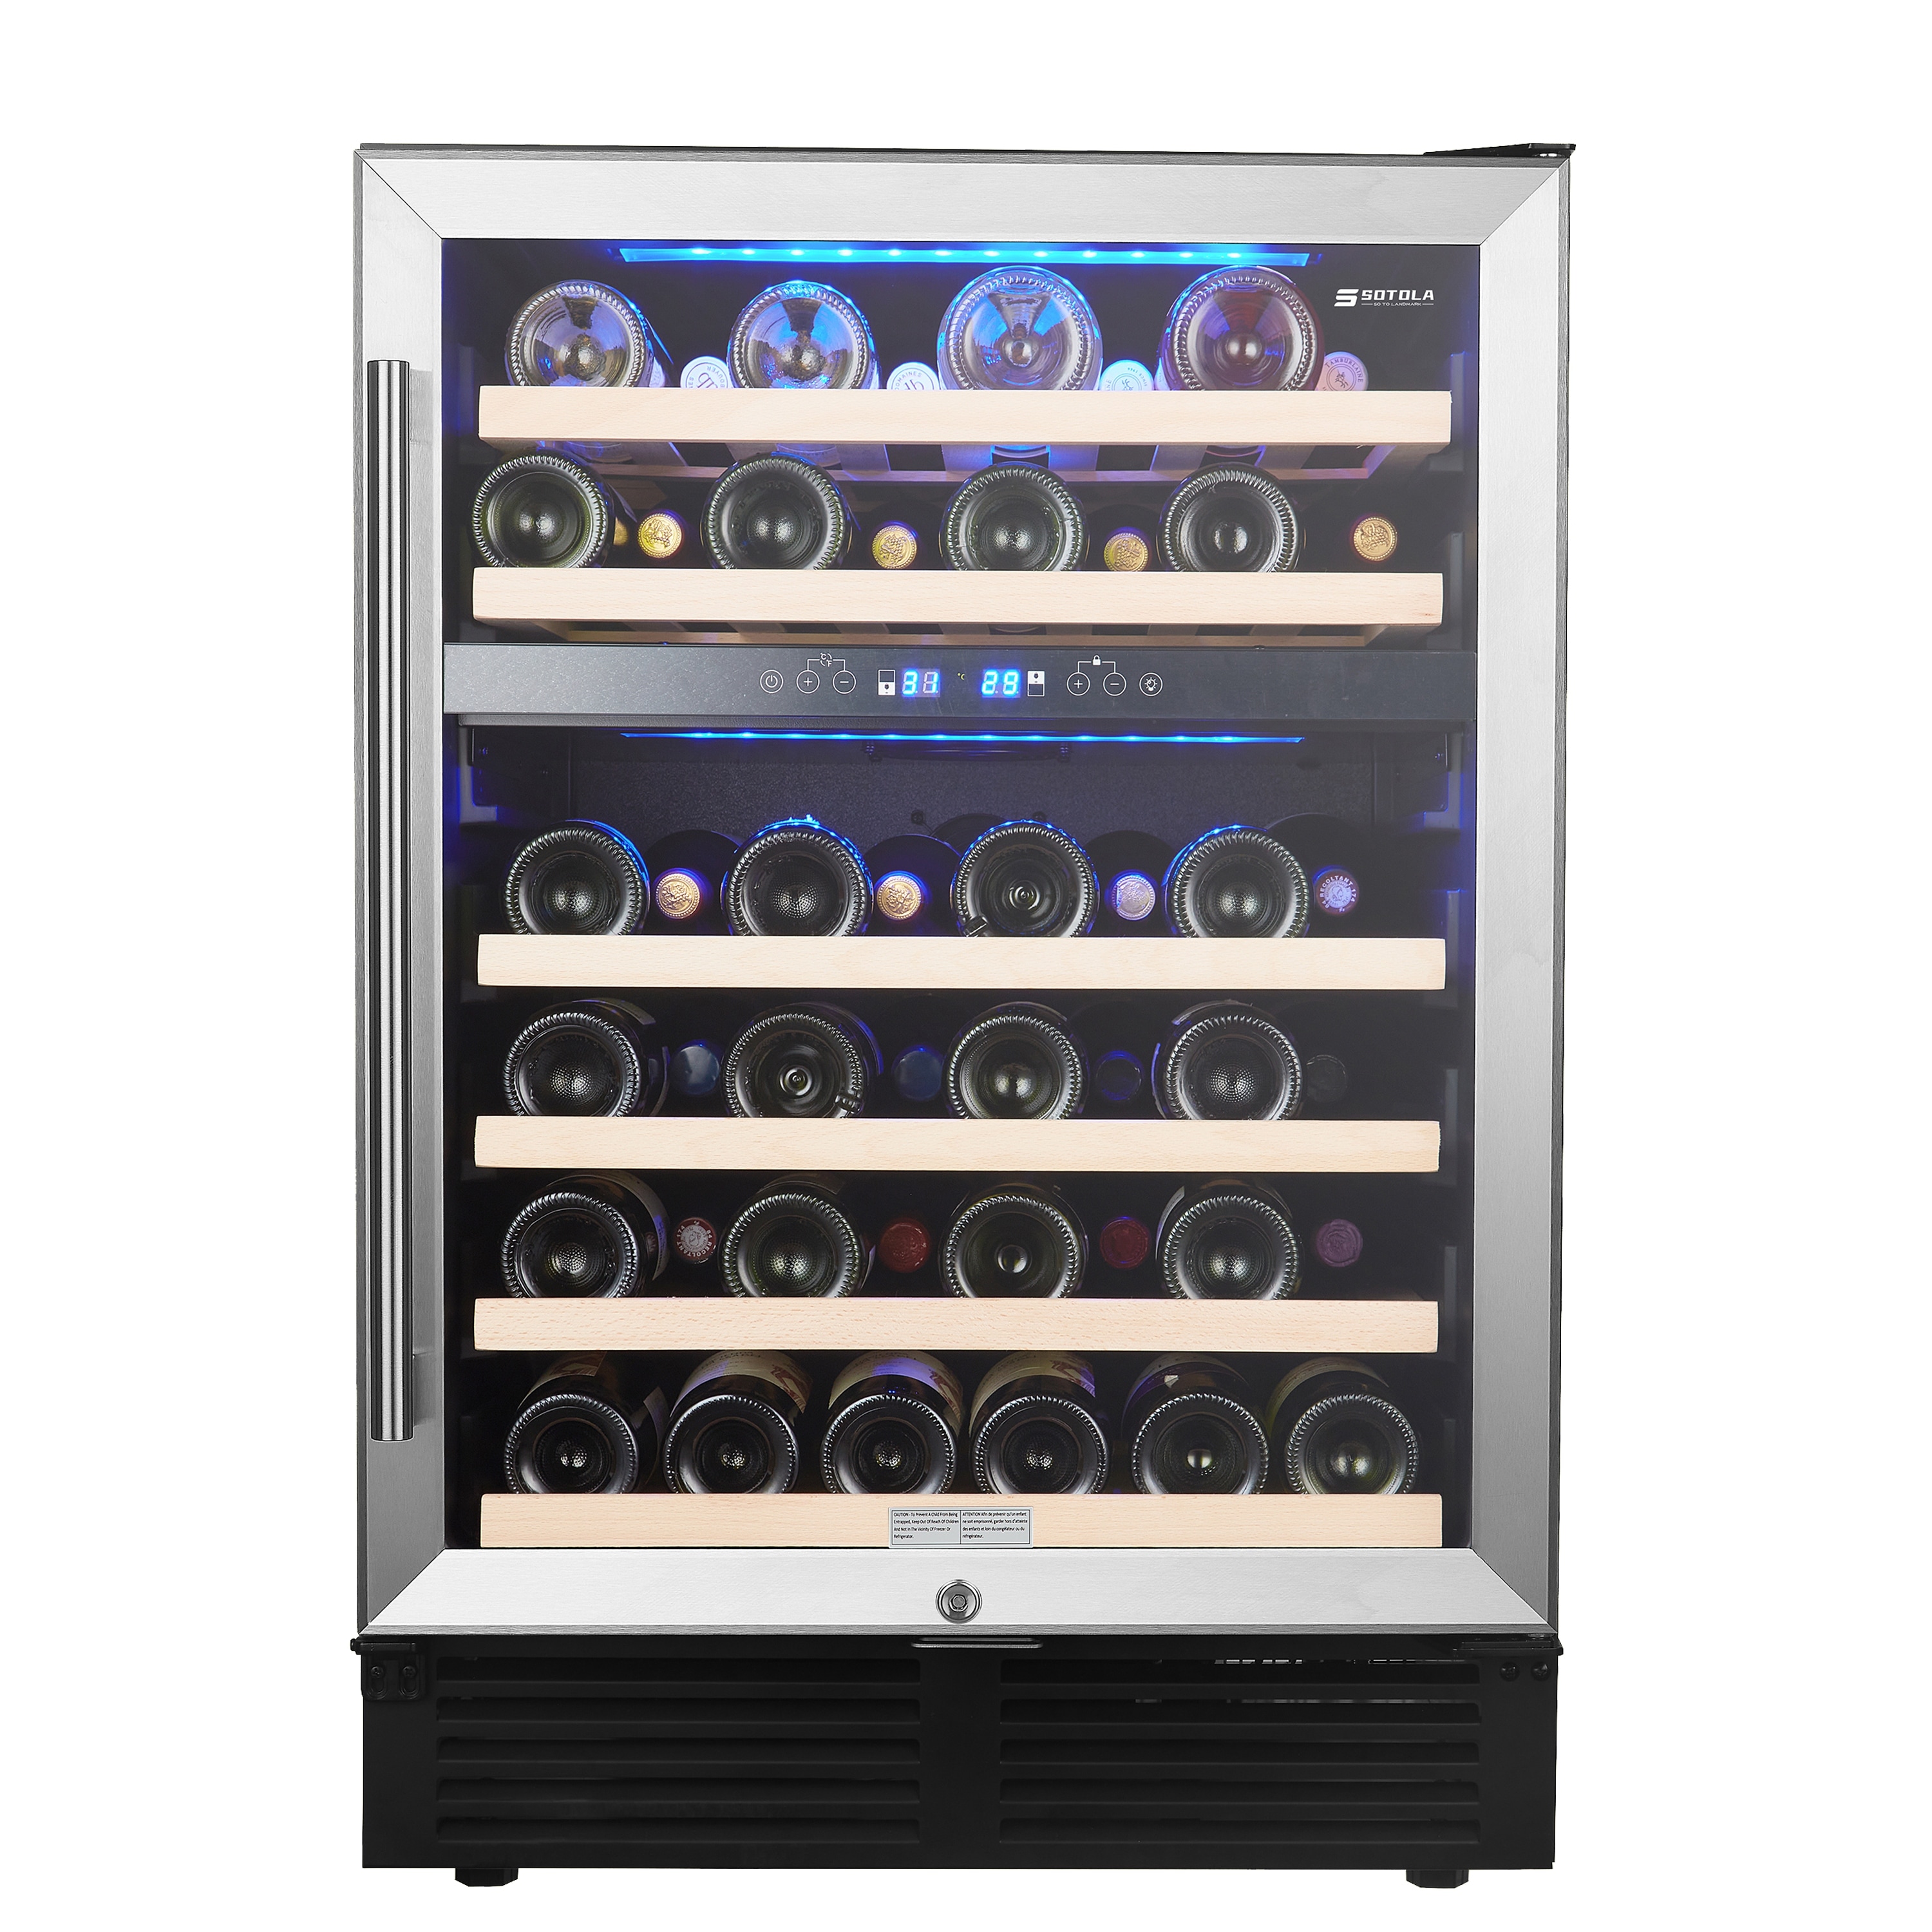 https://ak1.ostkcdn.com/images/products/is/images/direct/ded5b2a19fac8817dd398d9983ad044c52dc645d/Freestanding-Wine-Cooler-Cabinet-Beverage-Fridge-Small-Wine-Cellar.jpg